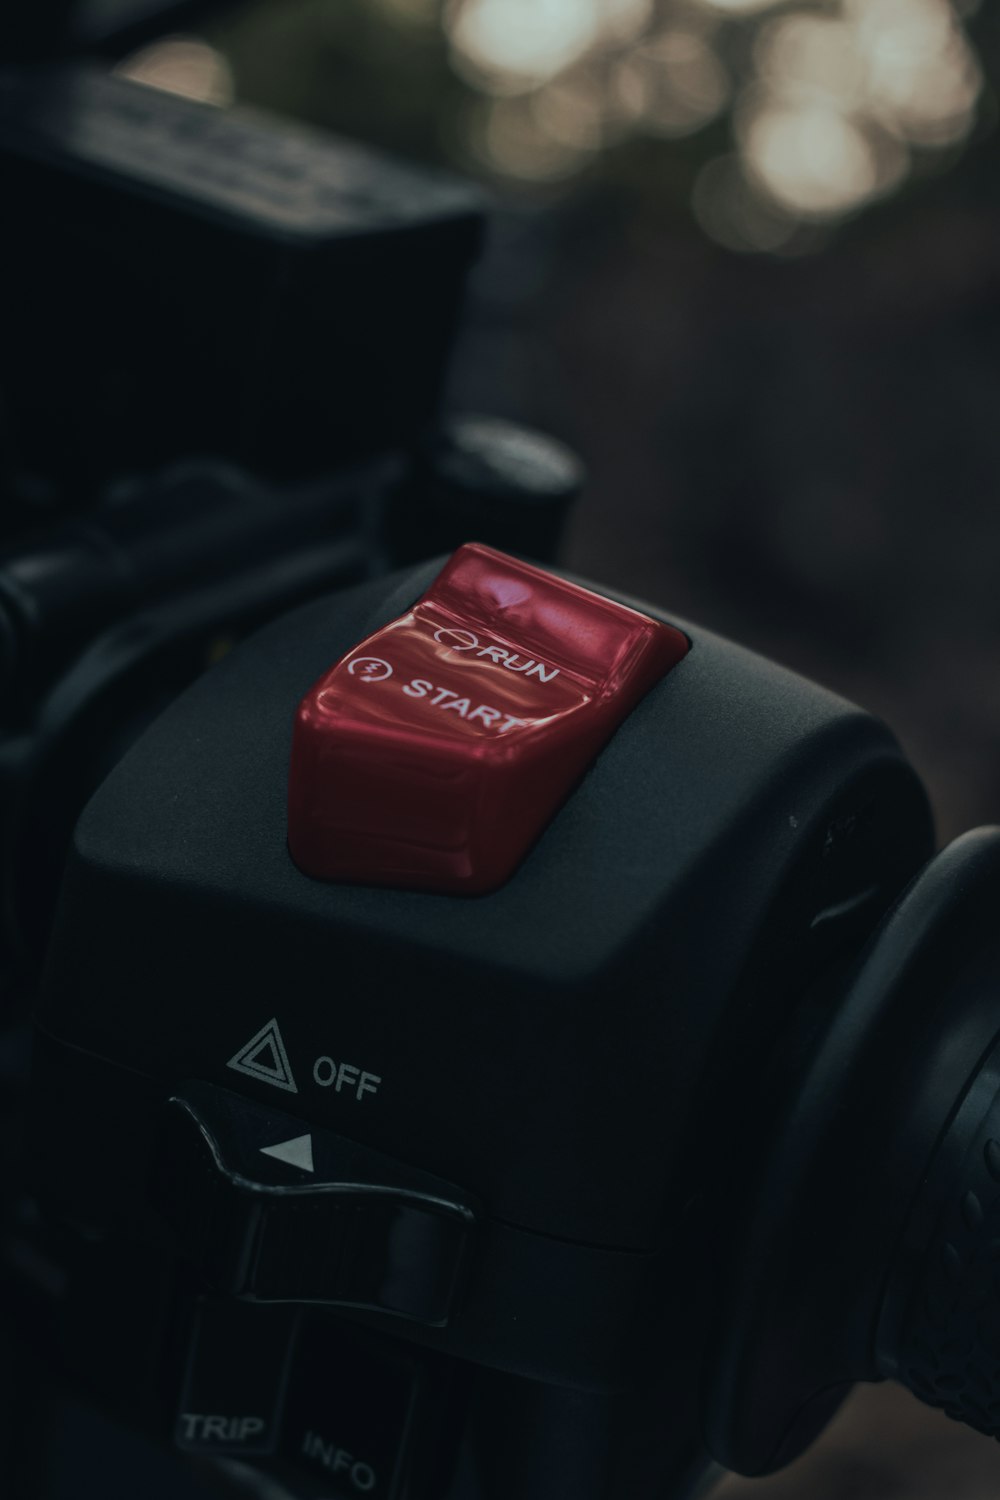 a close up of a camera with a red button